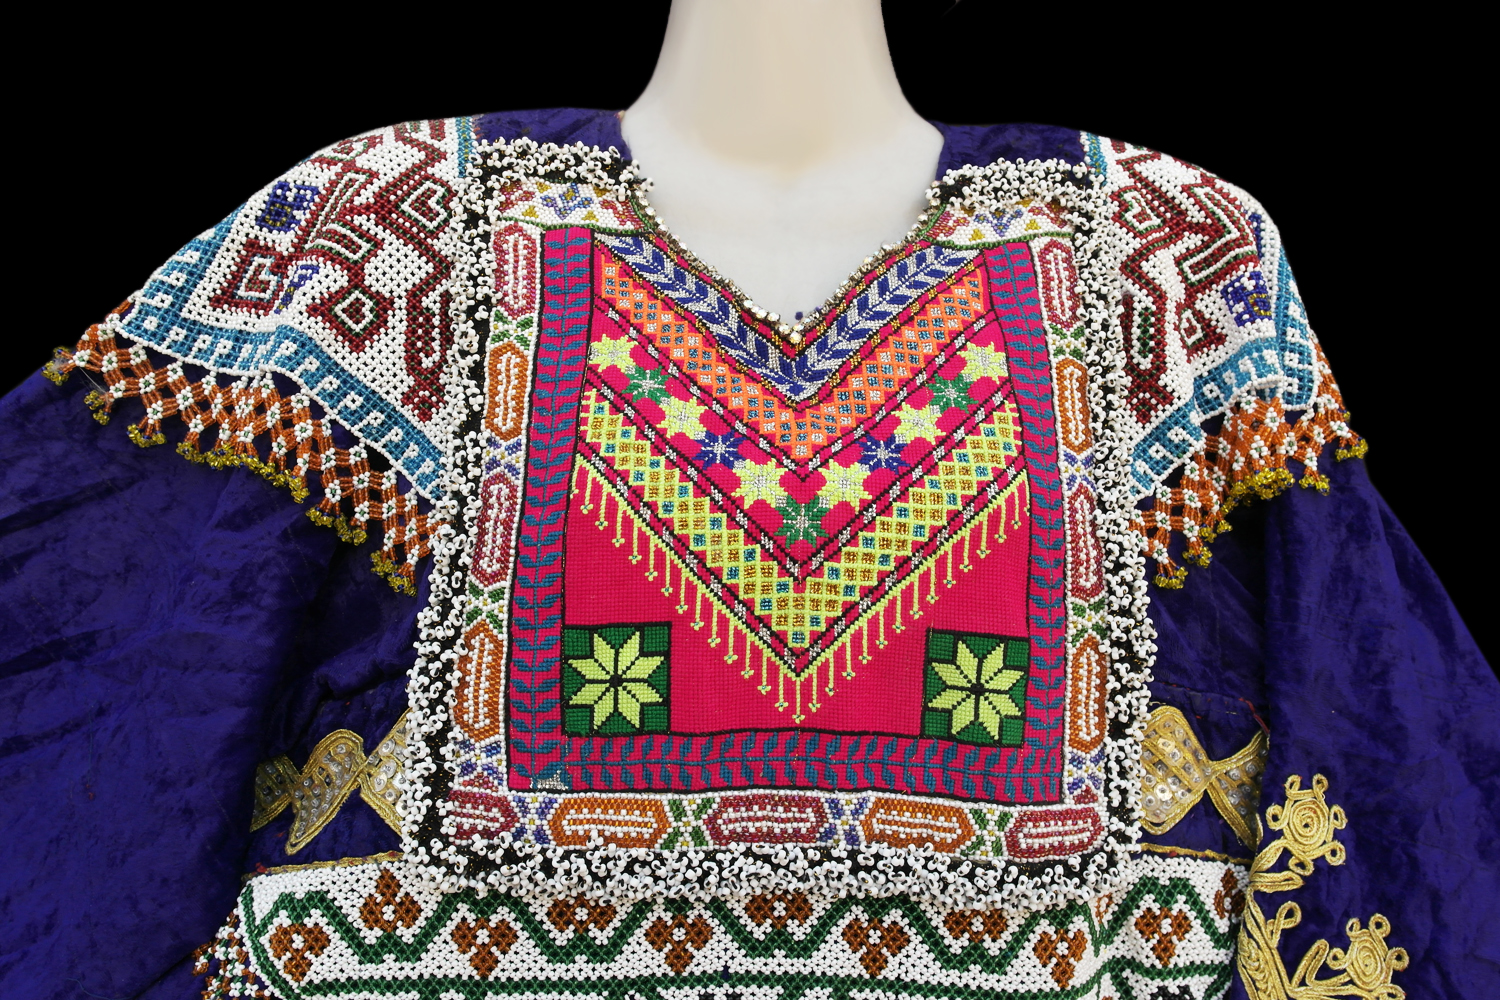 pashtun women ethnic clothes with beads and embroidery needlework